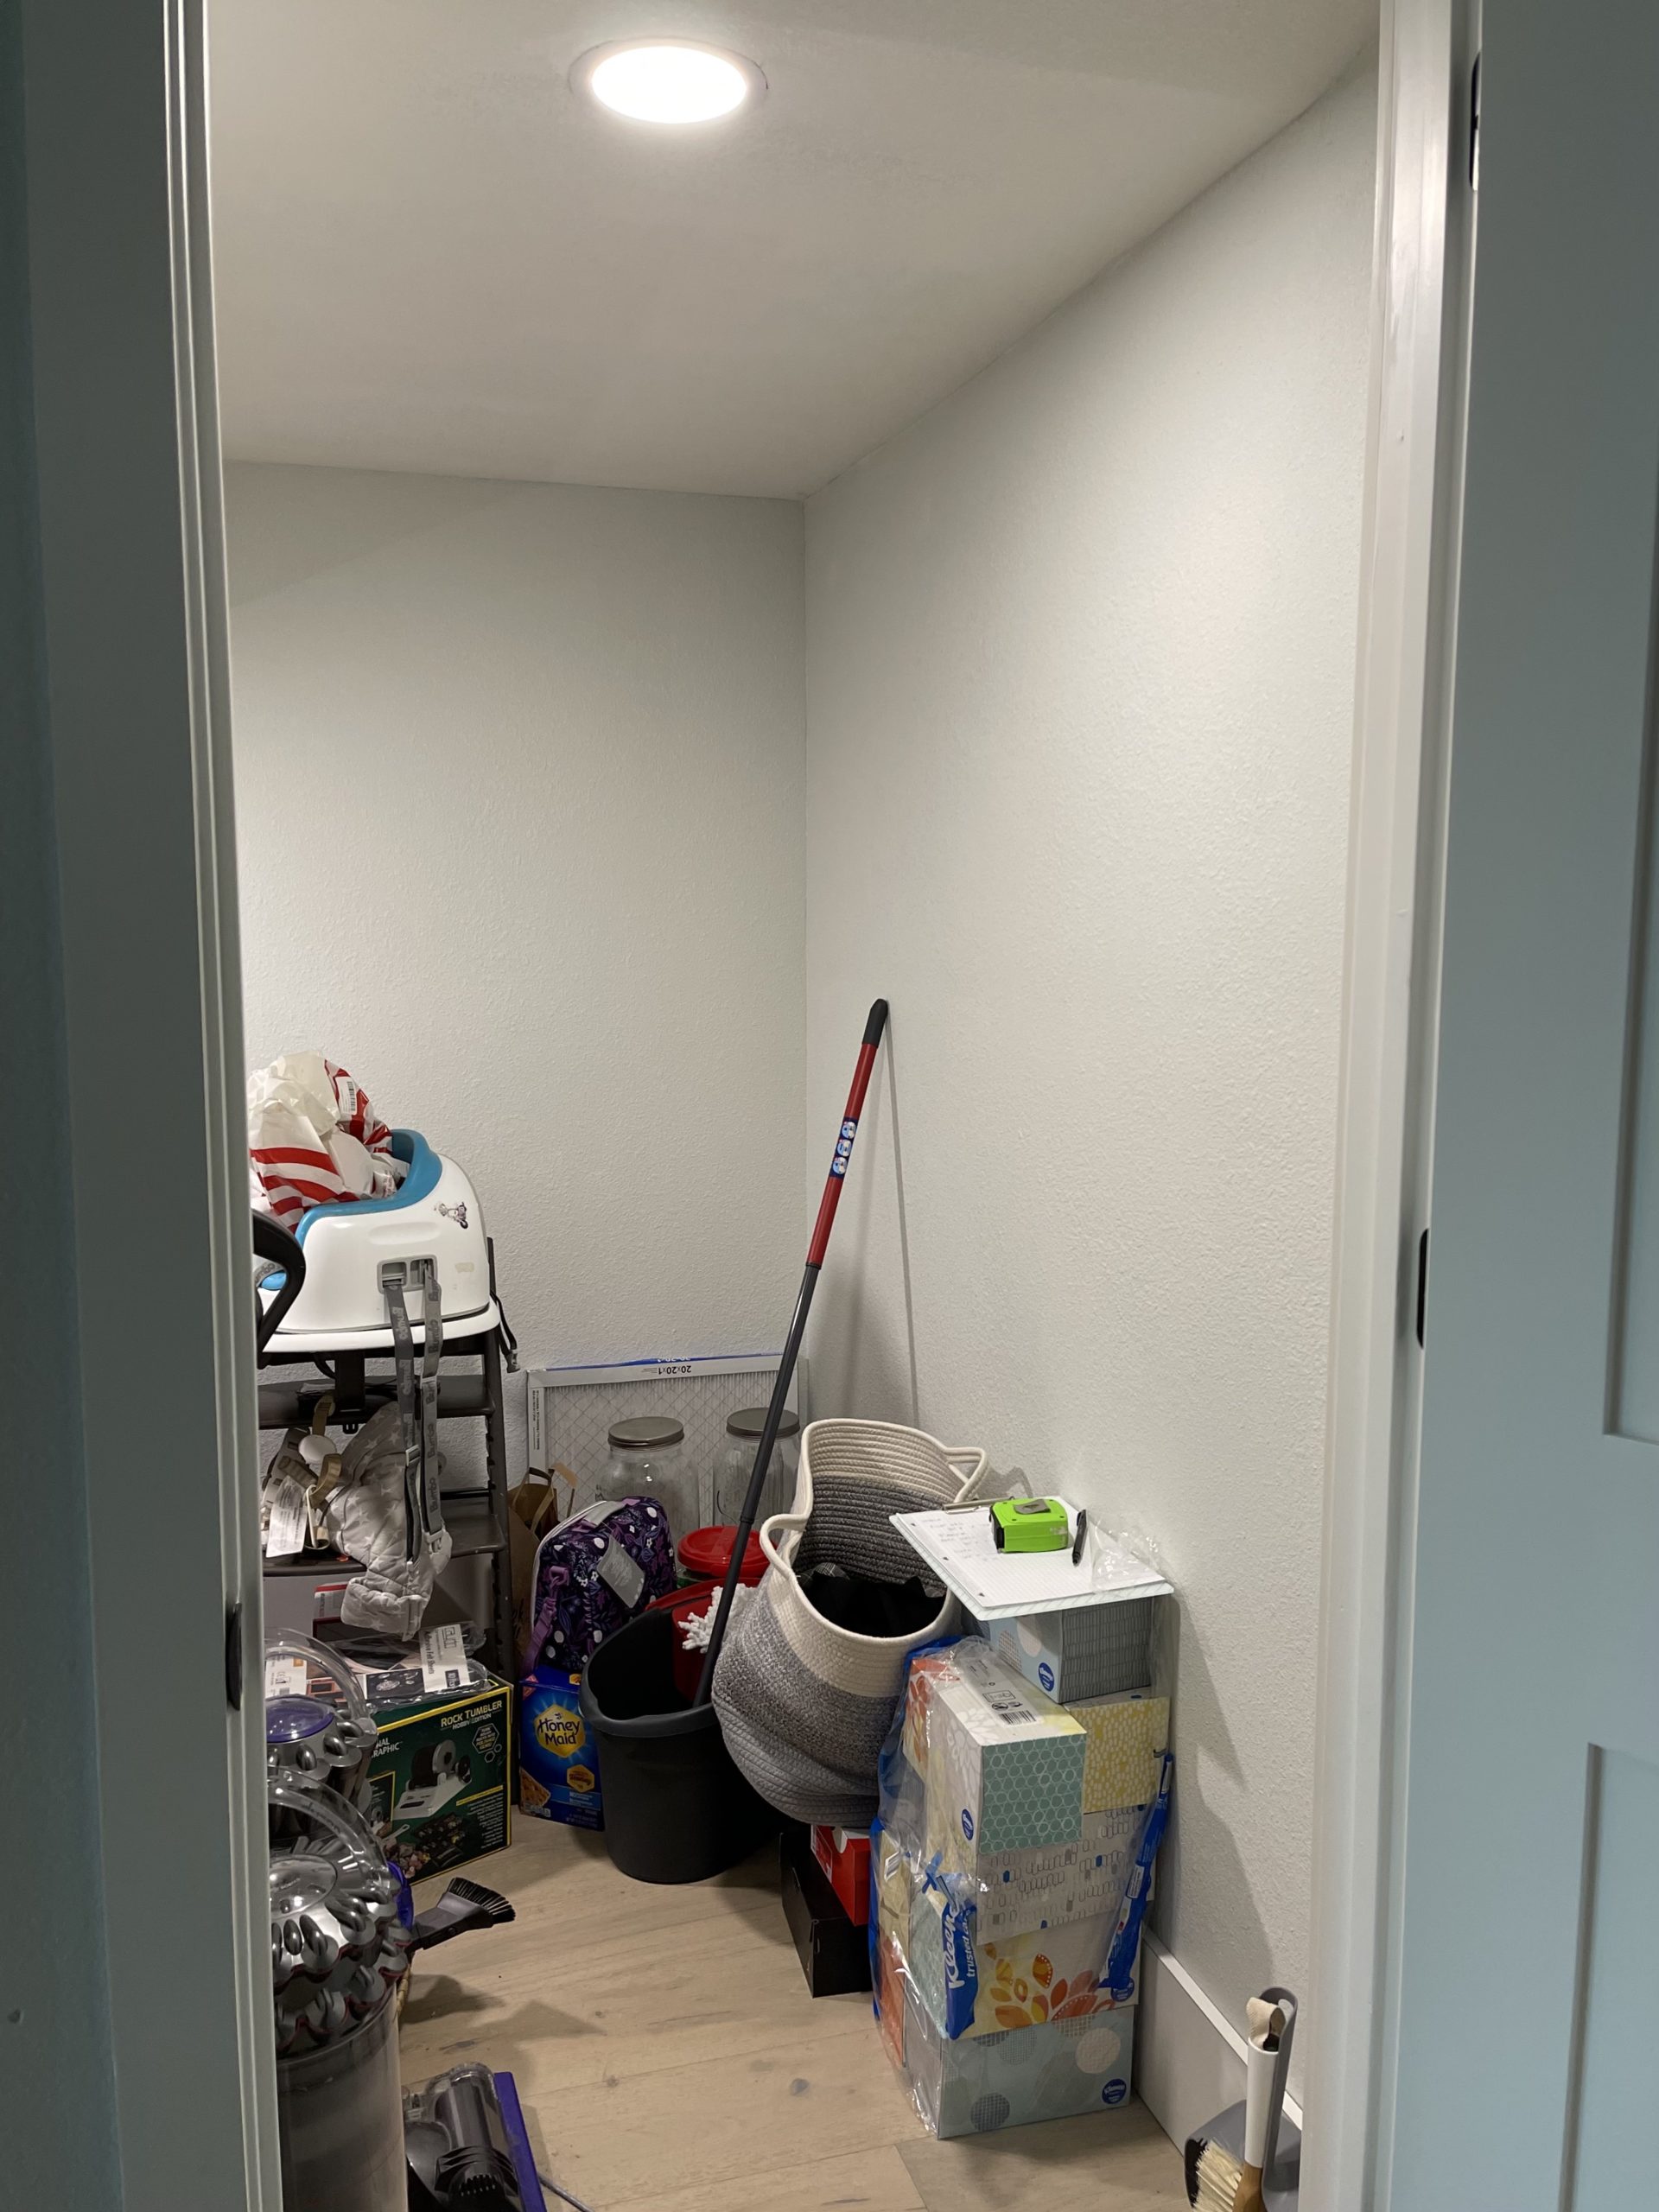 https://simplyorganized.me/wp-content/uploads/2022/08/simply-organized-under-stairs-closet-danville-california-before-shelving-scaled.jpg